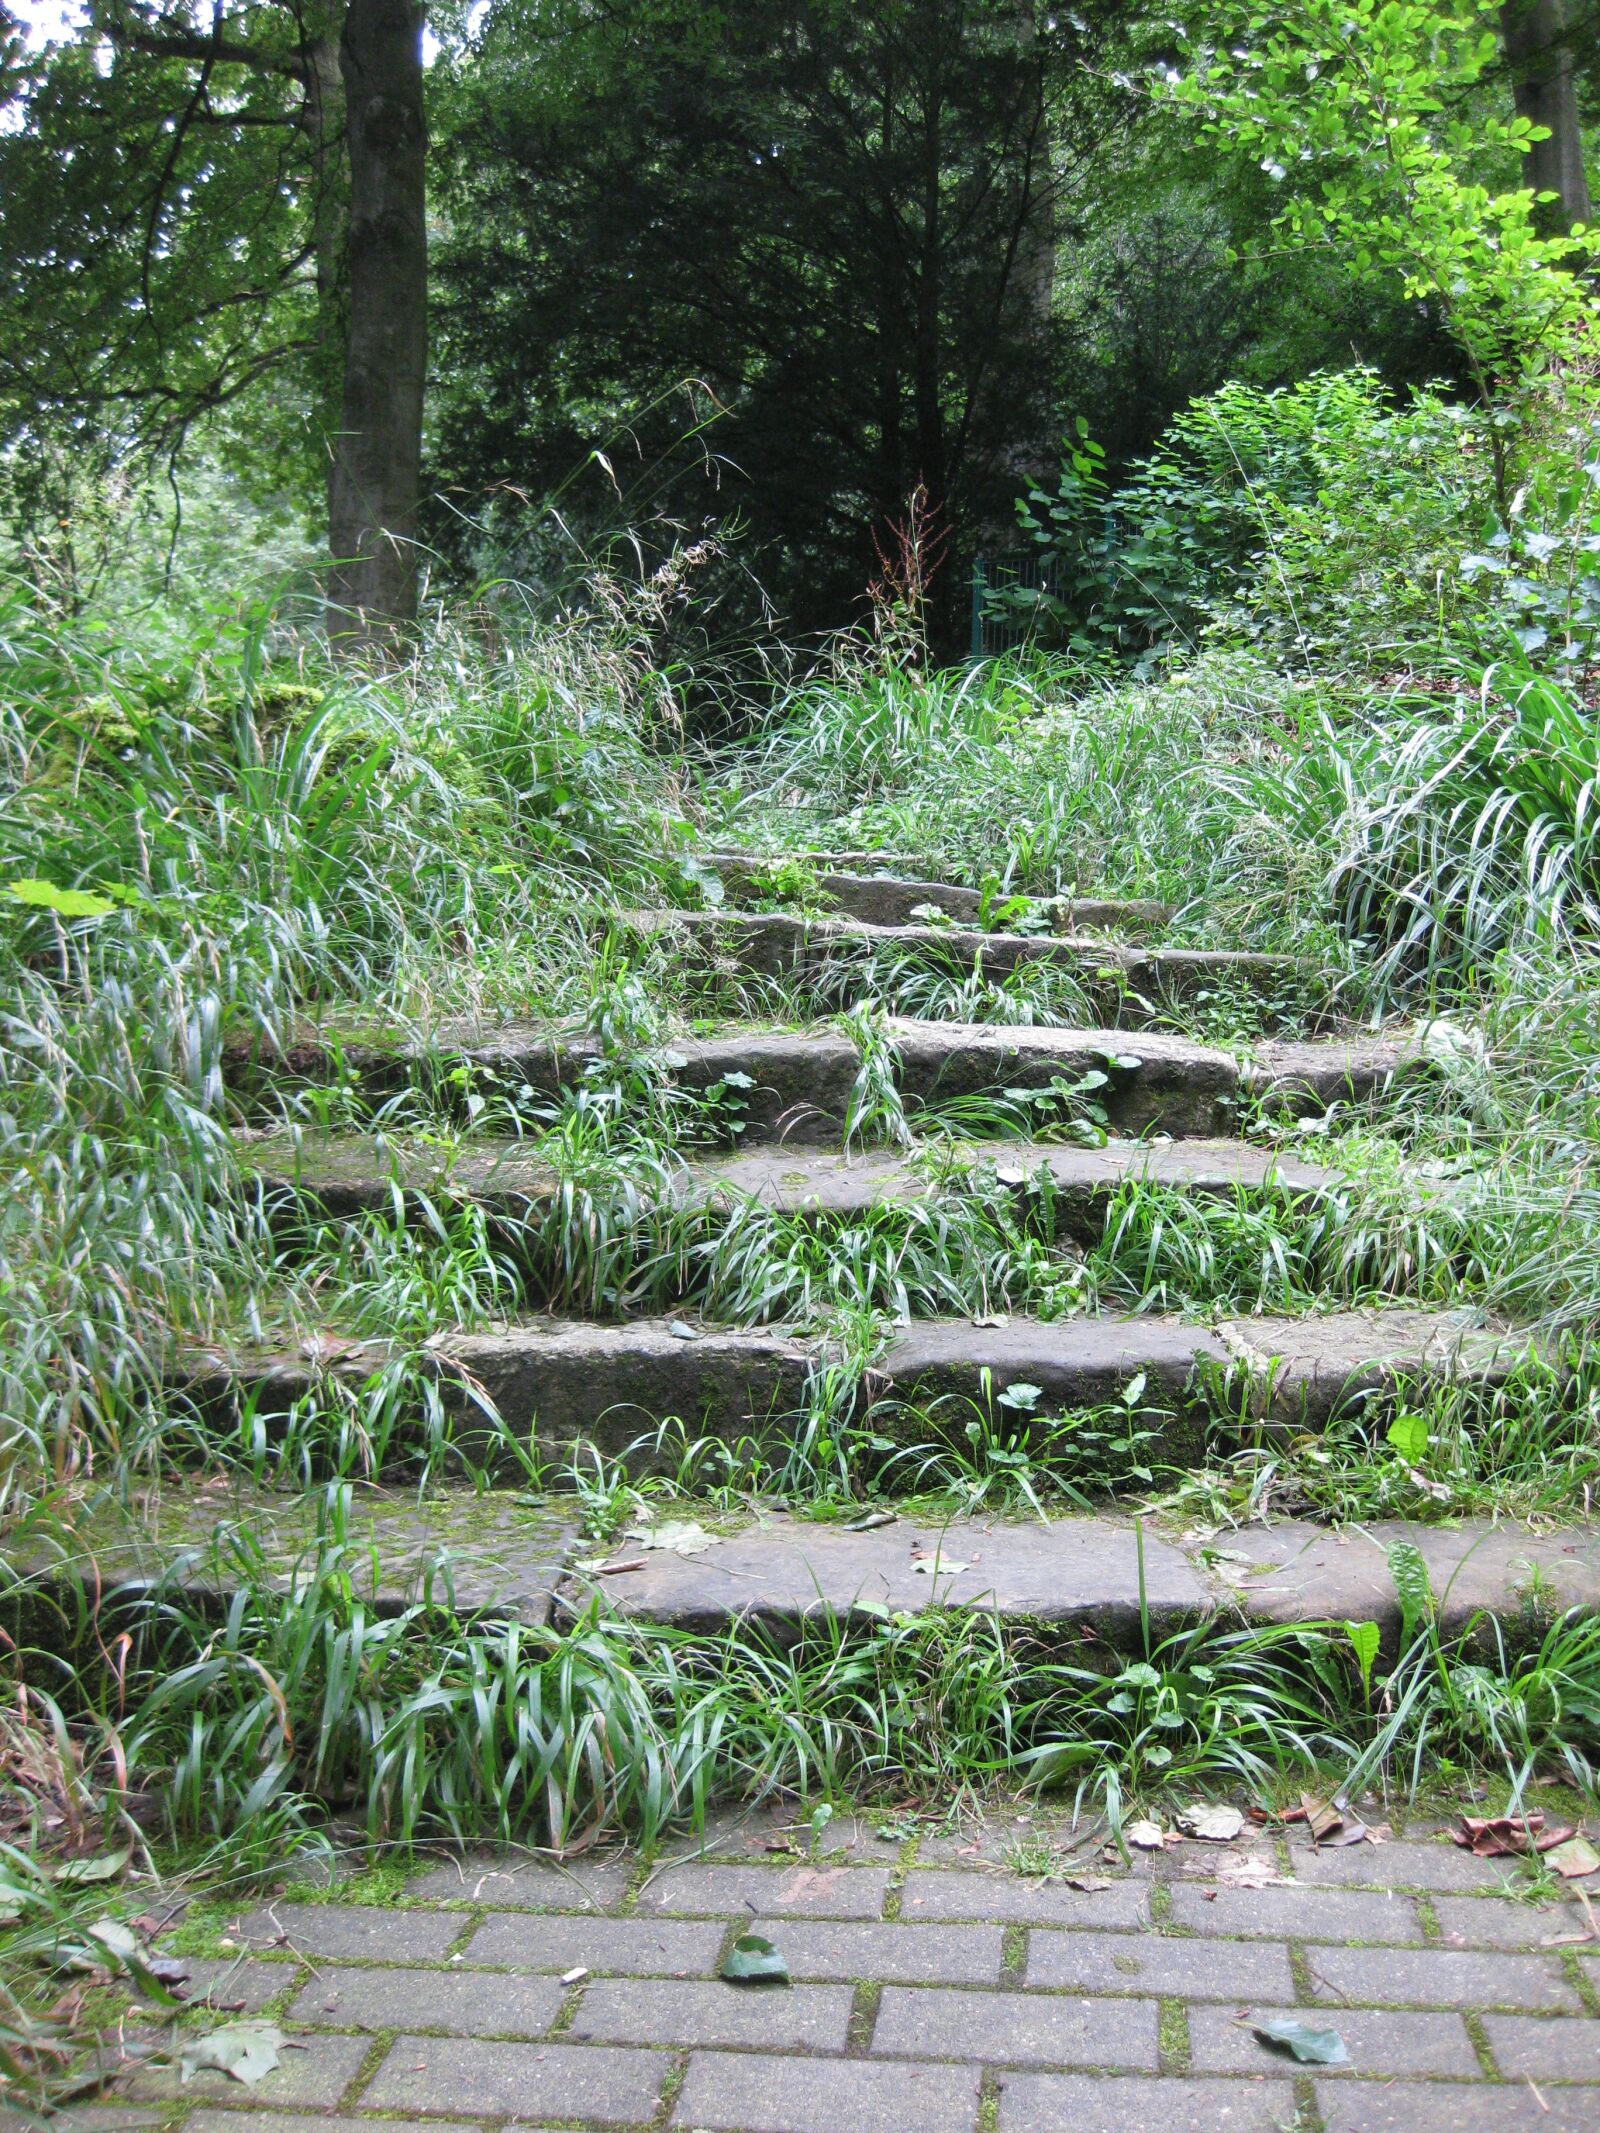 Canon PowerShot SD770 IS (Digital IXUS 85 IS / IXY Digital 25 IS) sample photo. Stairs, forest, nature photography